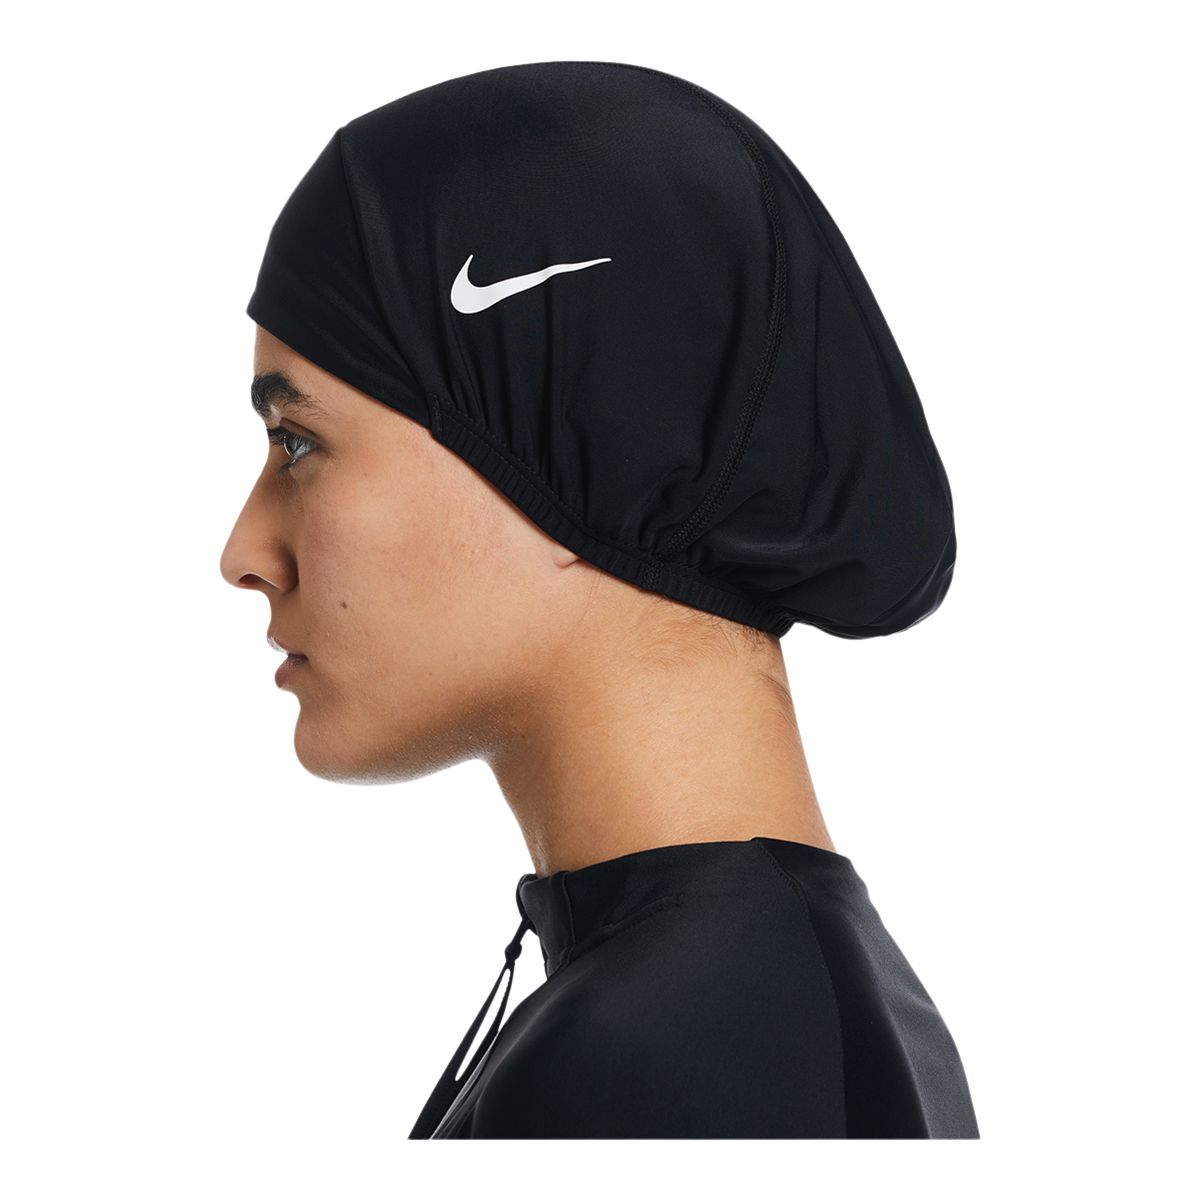 https://media-www.sportchek.ca/product/div-03-softgoods/dpt-70-athletic-clothing/sdpt-02-womens/334133782/nike-w-victory-swim-head-cover-q123-blk-716299d7-e2a6-4cfd-84dd-7cdee283dd7d-jpgrendition.jpg?imdensity=1&imwidth=1244&impolicy=mZoom